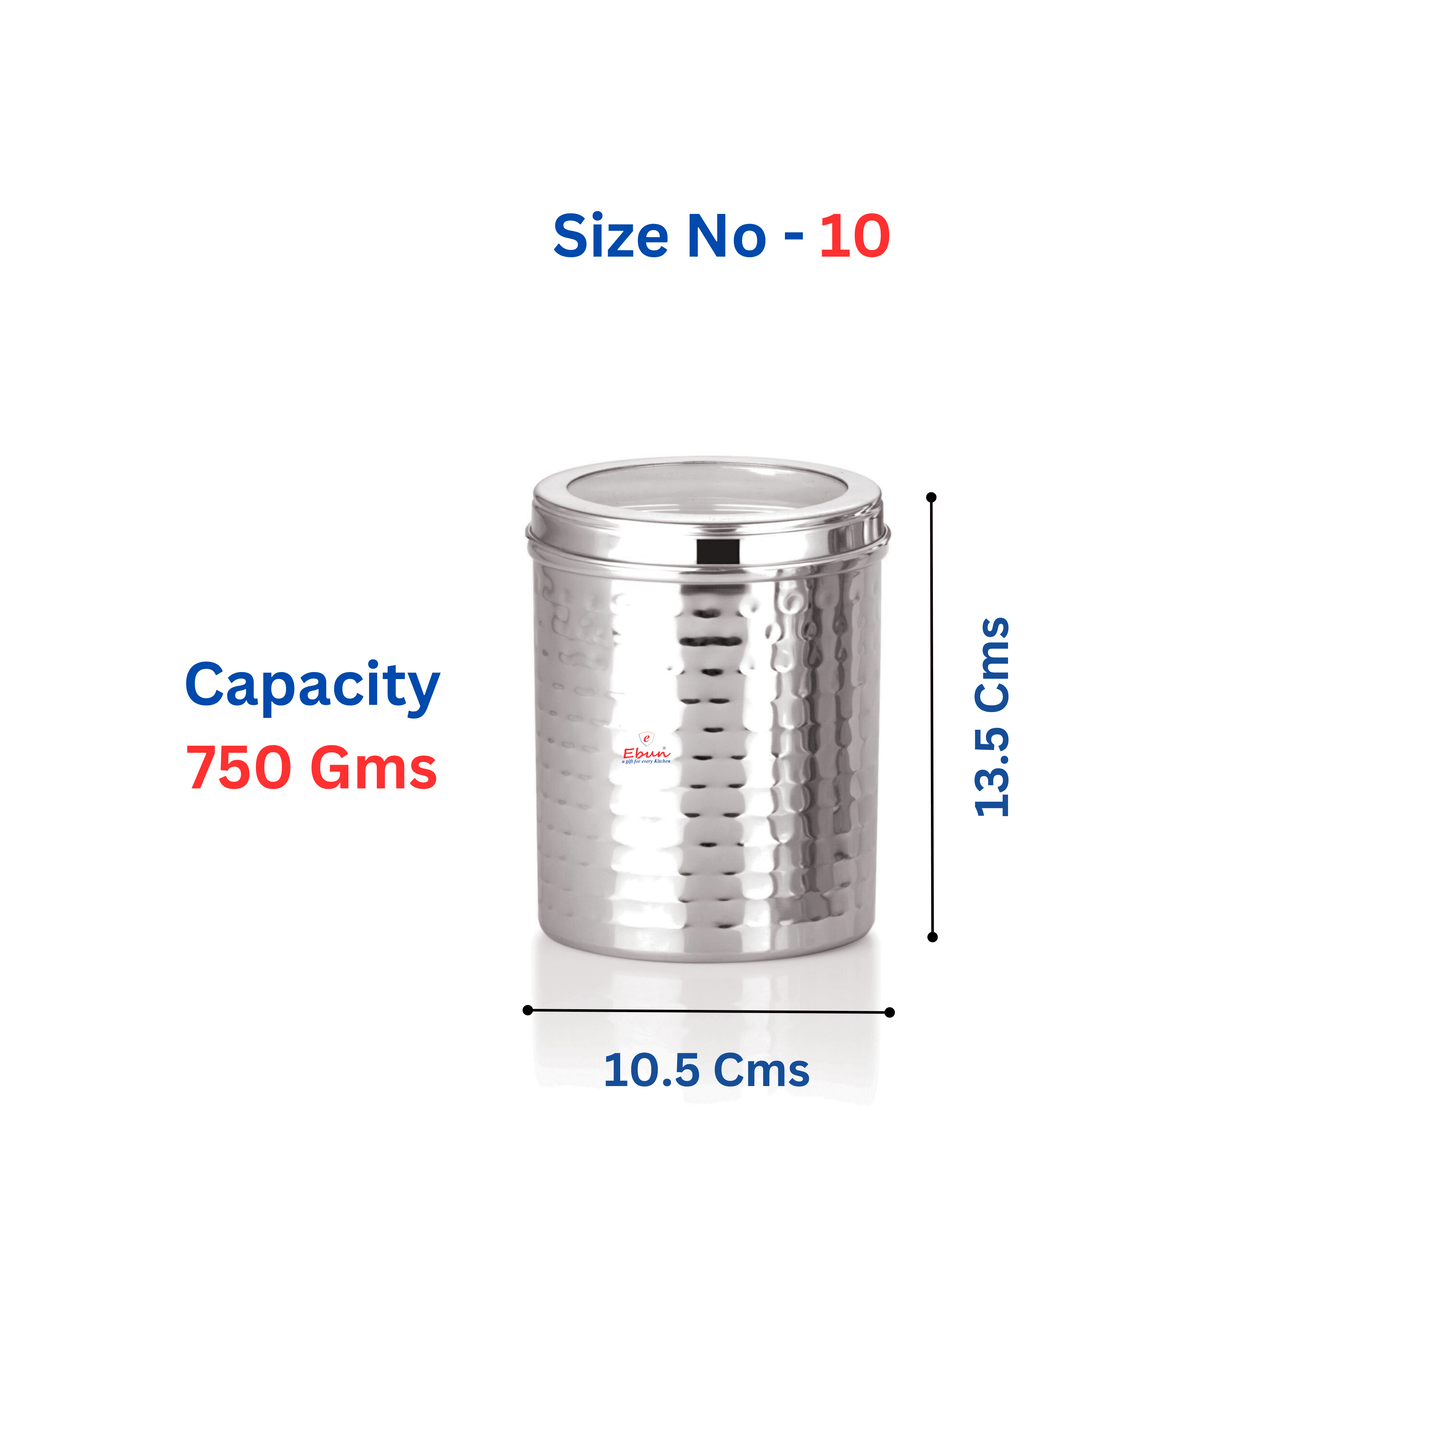 steel container with lid | kitchen containers set steel | steel container for kitchen storage set | steel containers | stainless steel storage containers | stainless steel containers with lid | kitchen steel containers set | stainless steel container | steel airtight container | steel storage containers